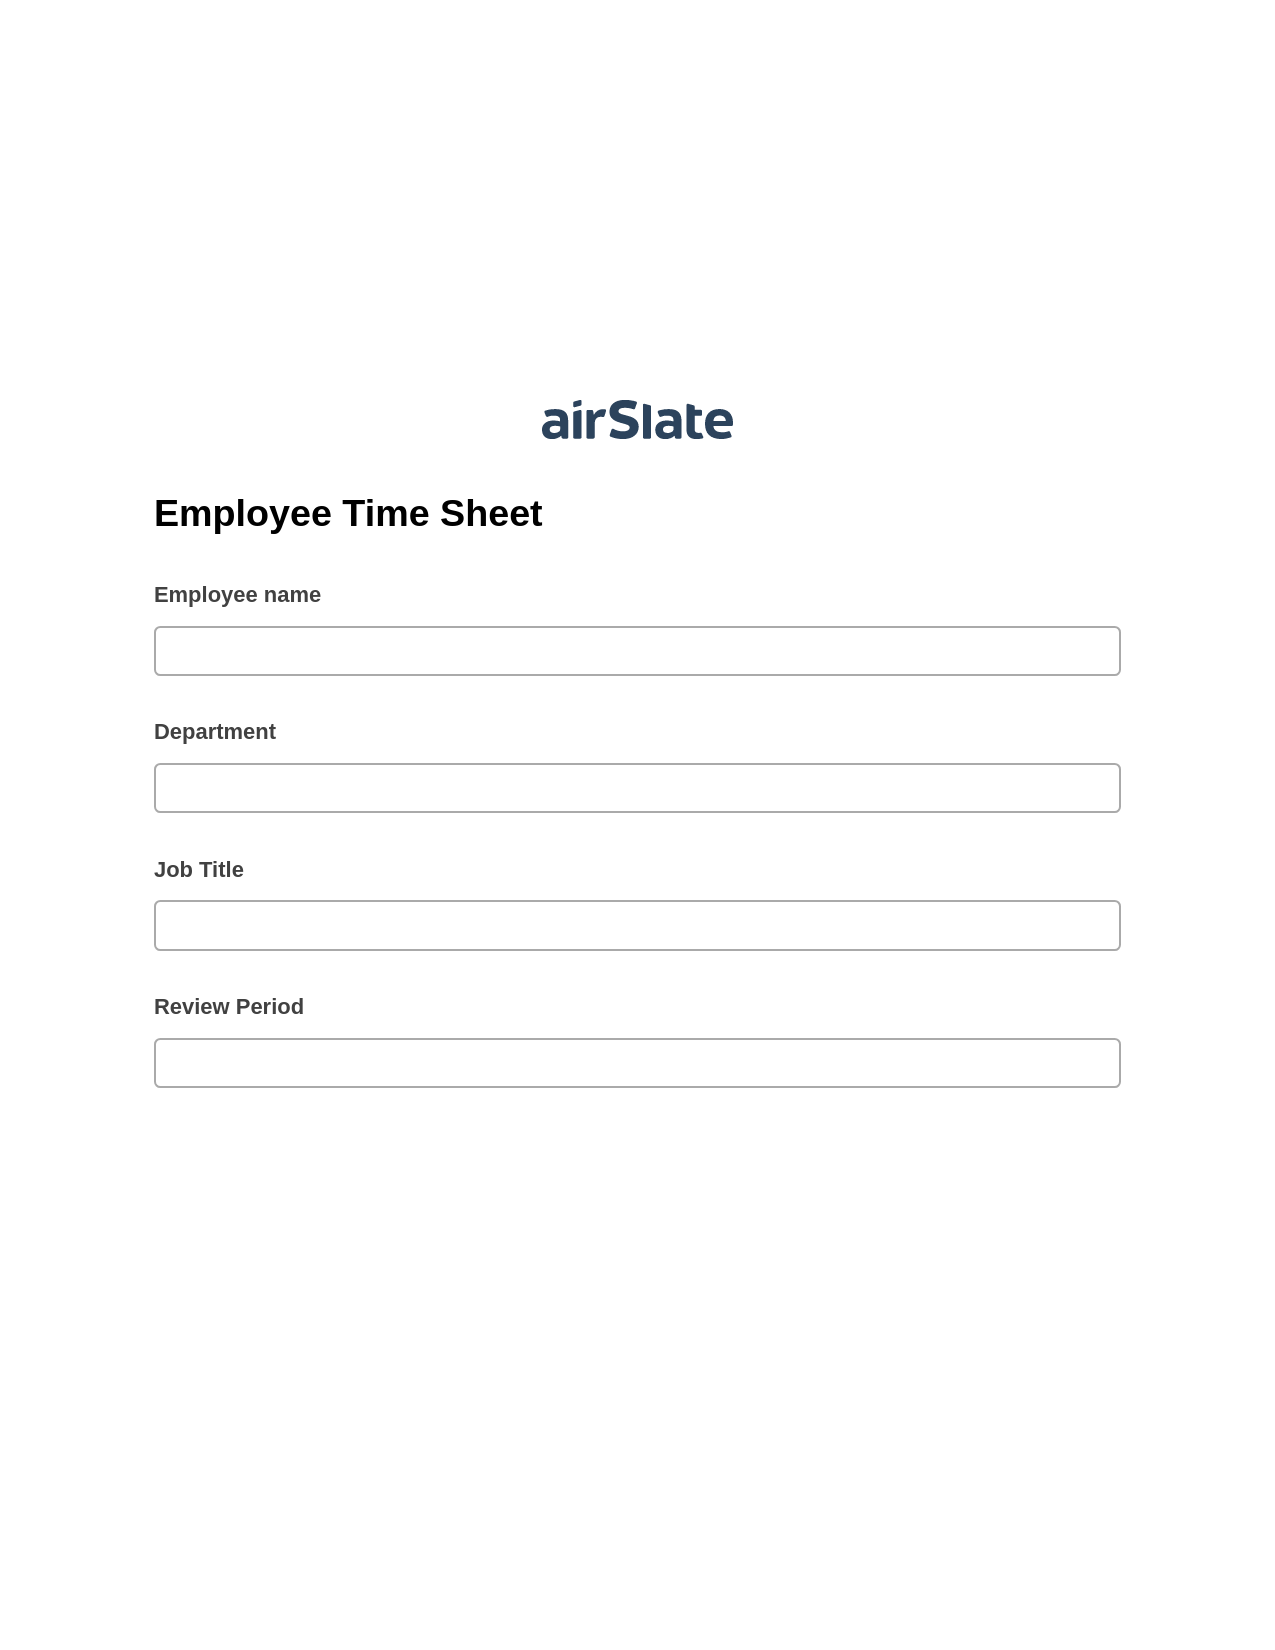 Employee Time Sheet Pre-fill from MS Dynamics 365 Records, Unassign Role Bot, Archive to Dropbox Bot